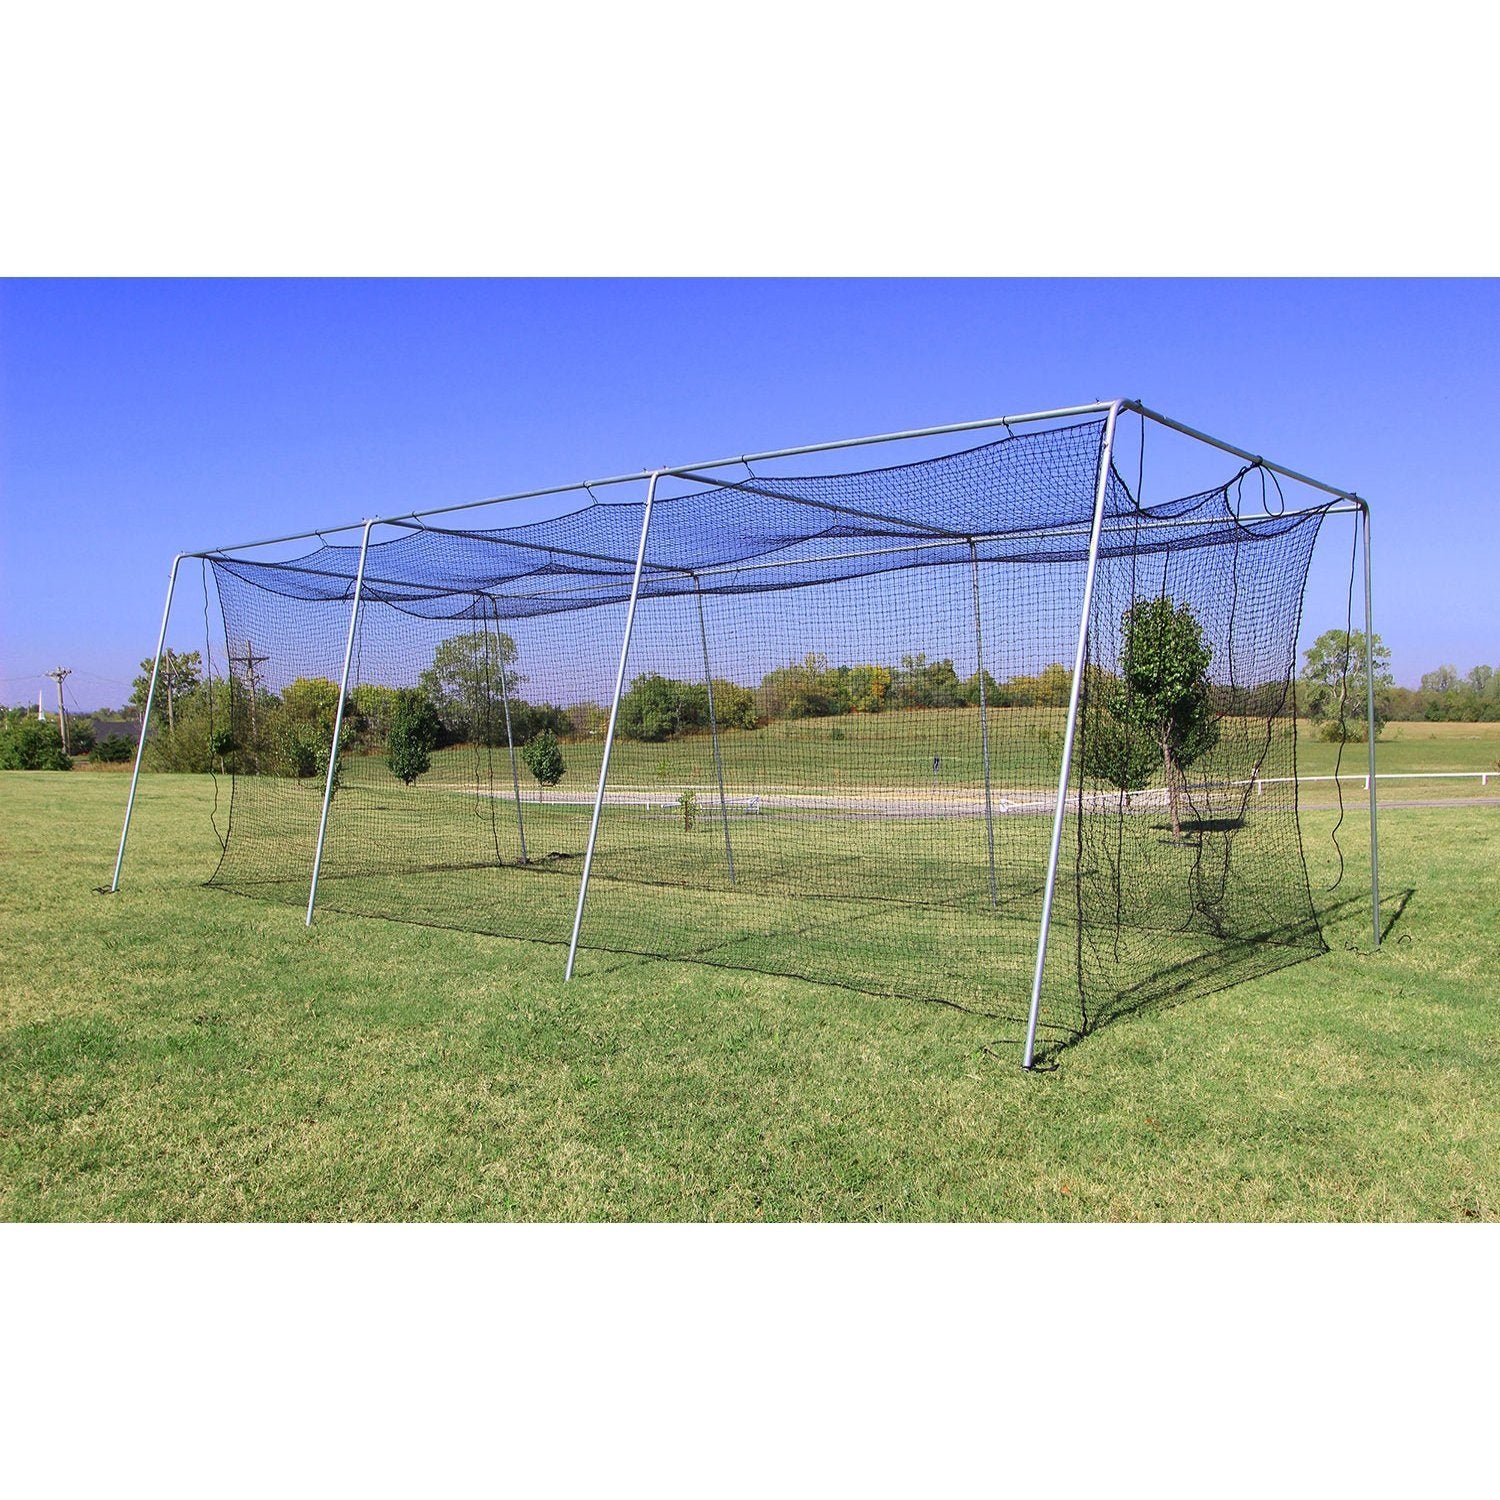 Cimarron Twisted Poly Batting Cage Net Side View